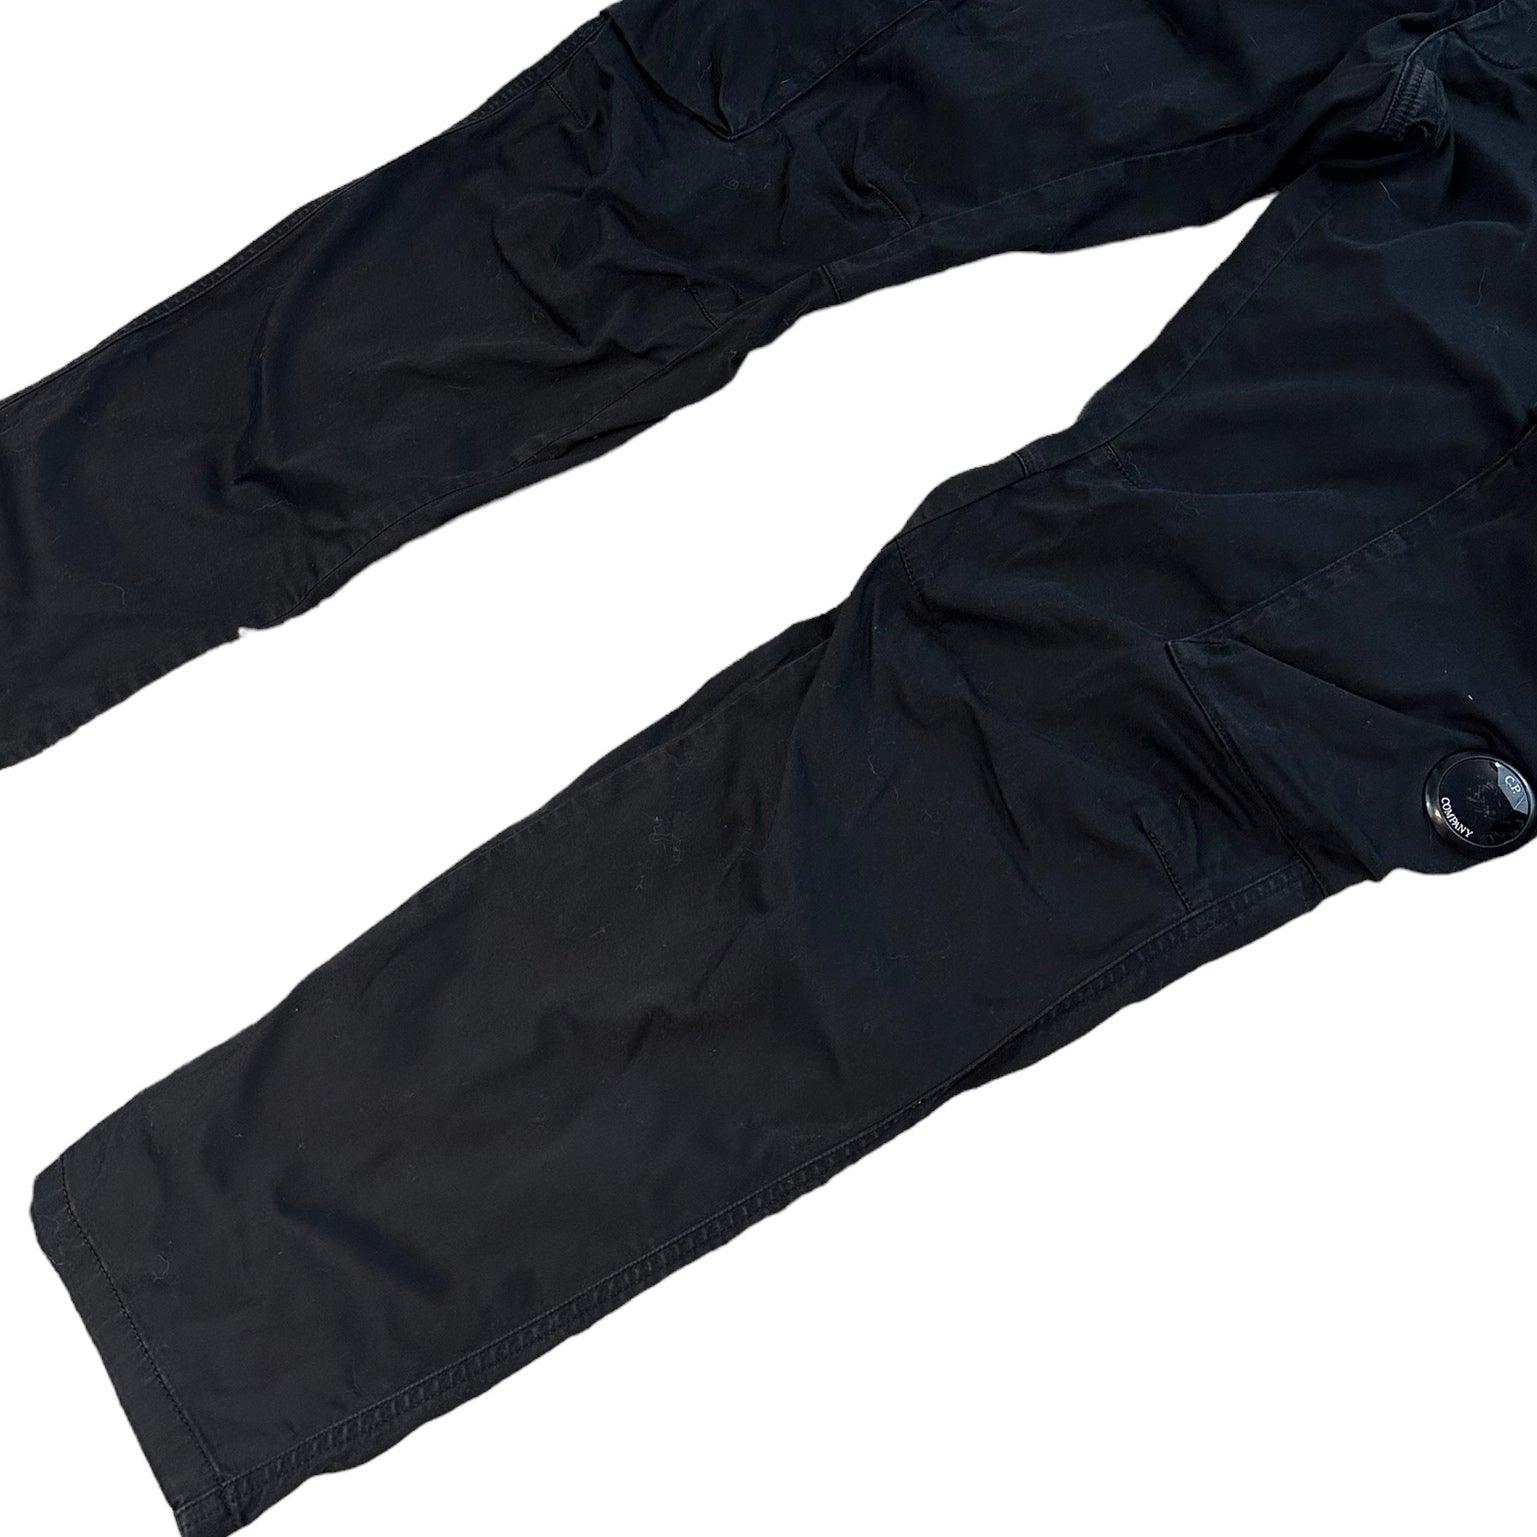 CP Company Micro Lens Cargo Trousers with Ergonomic Fit - Known Source